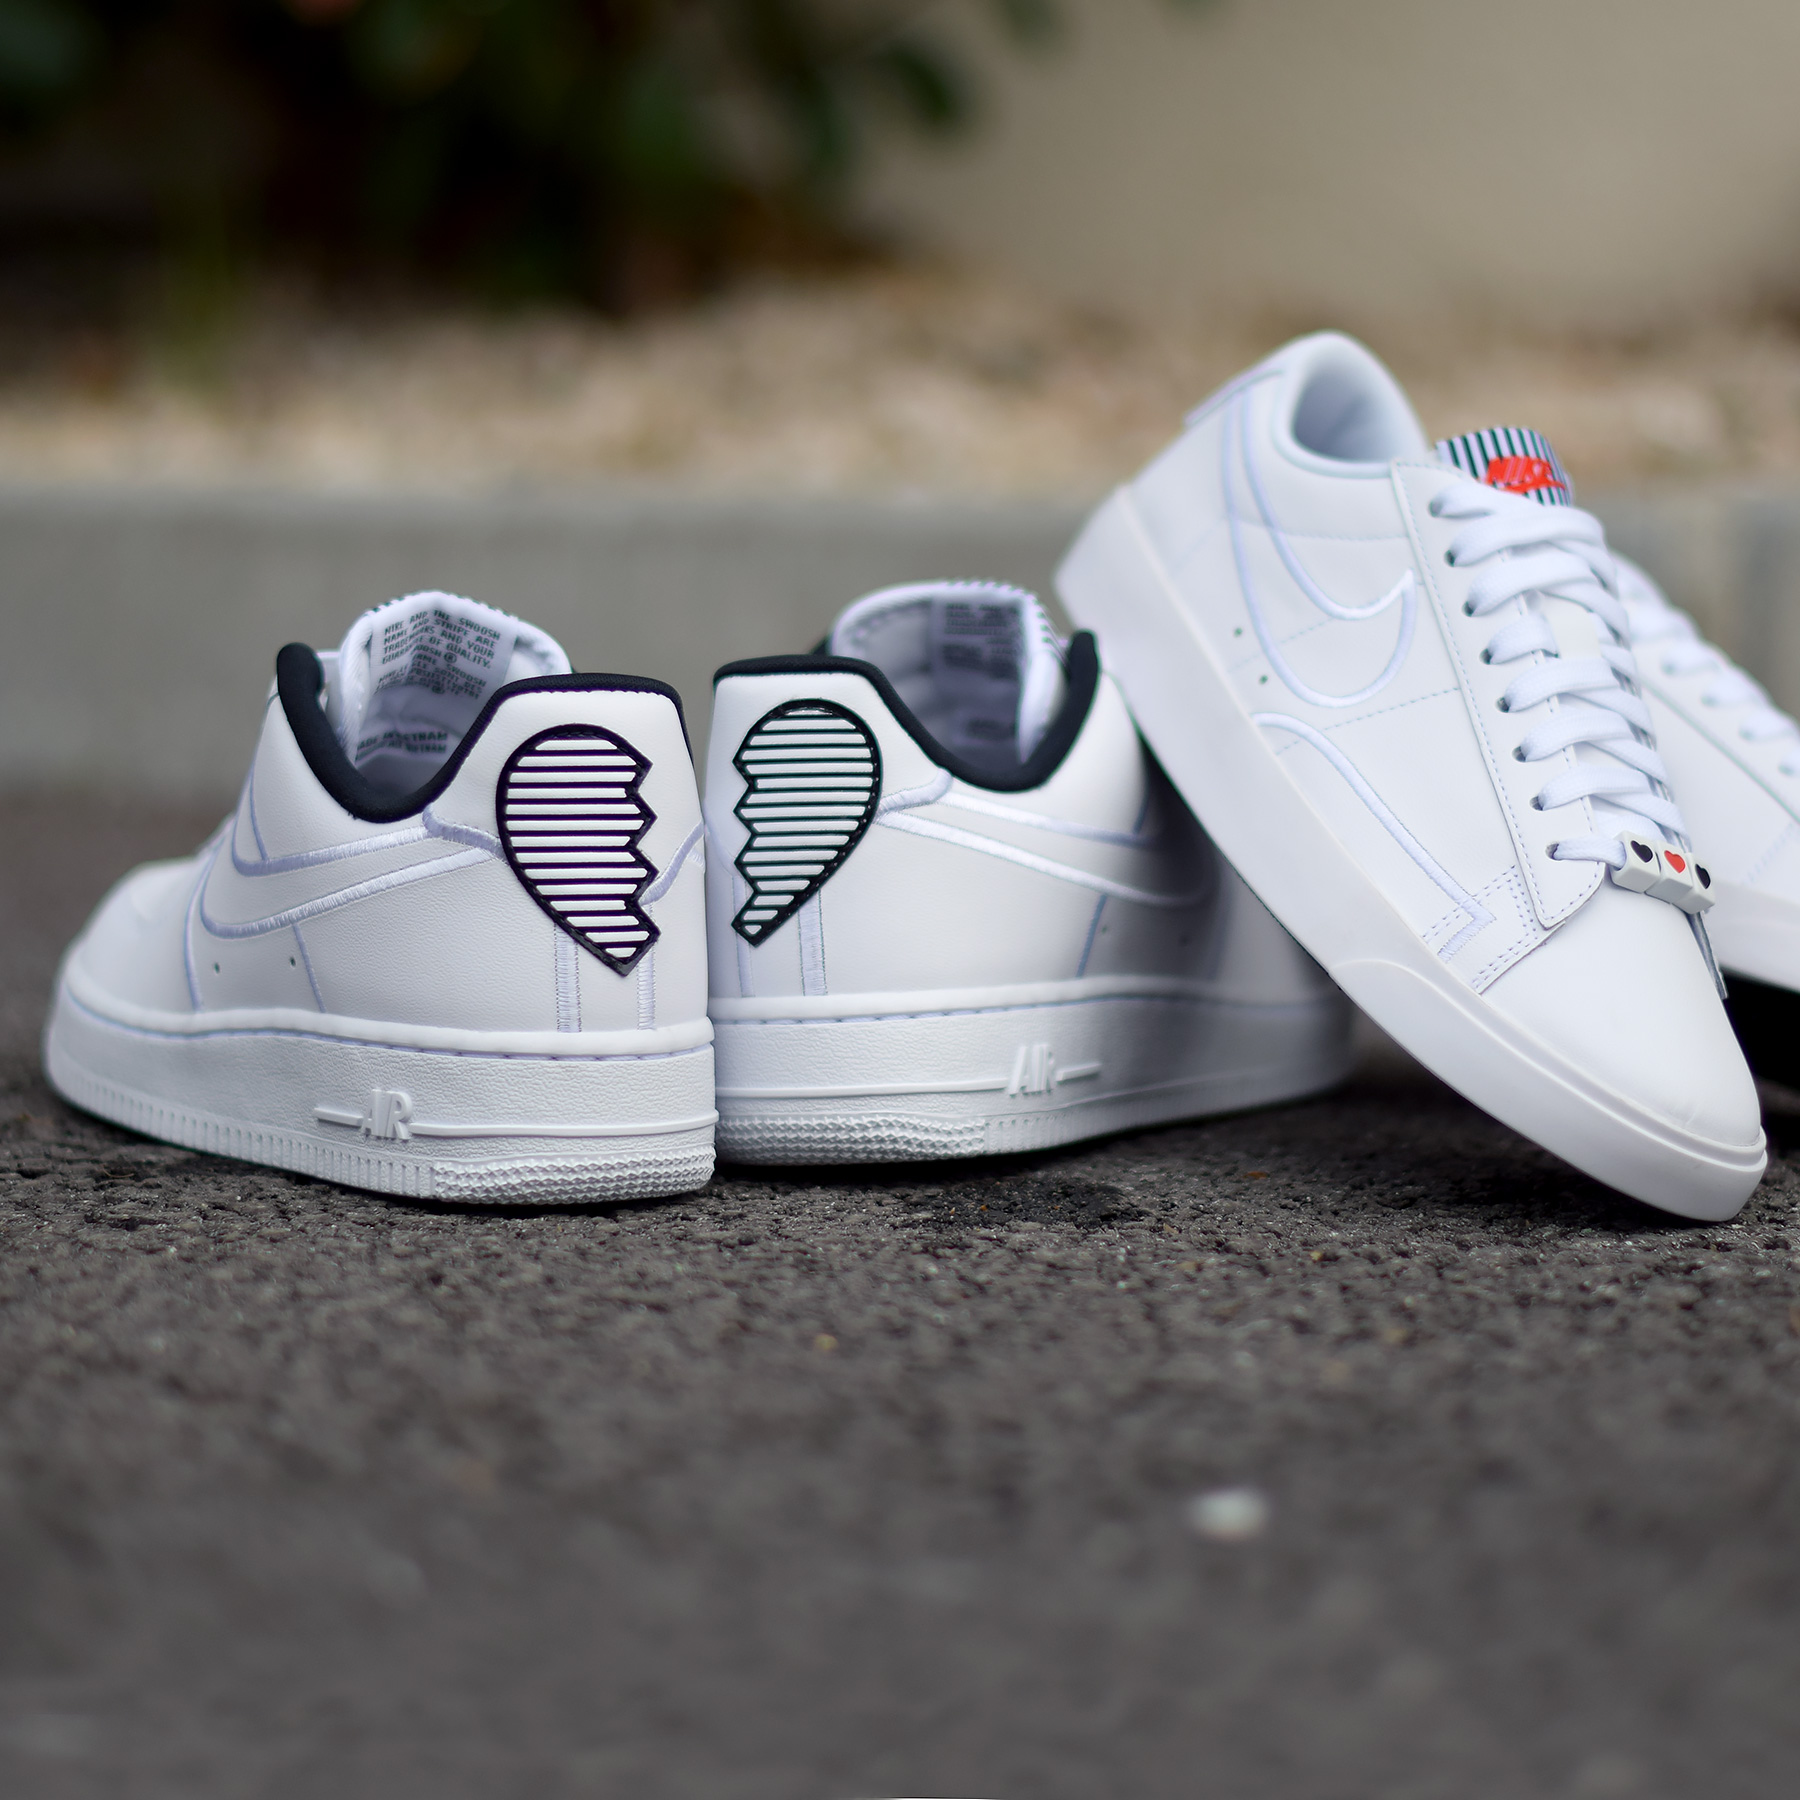 Air force valentines day. Nike Air Force Heart. Nike Air Force 1 Heart. Nike Air Force 1 Low Wmns “Valentines Day”. Nike Air Force 1 Low Valentine.